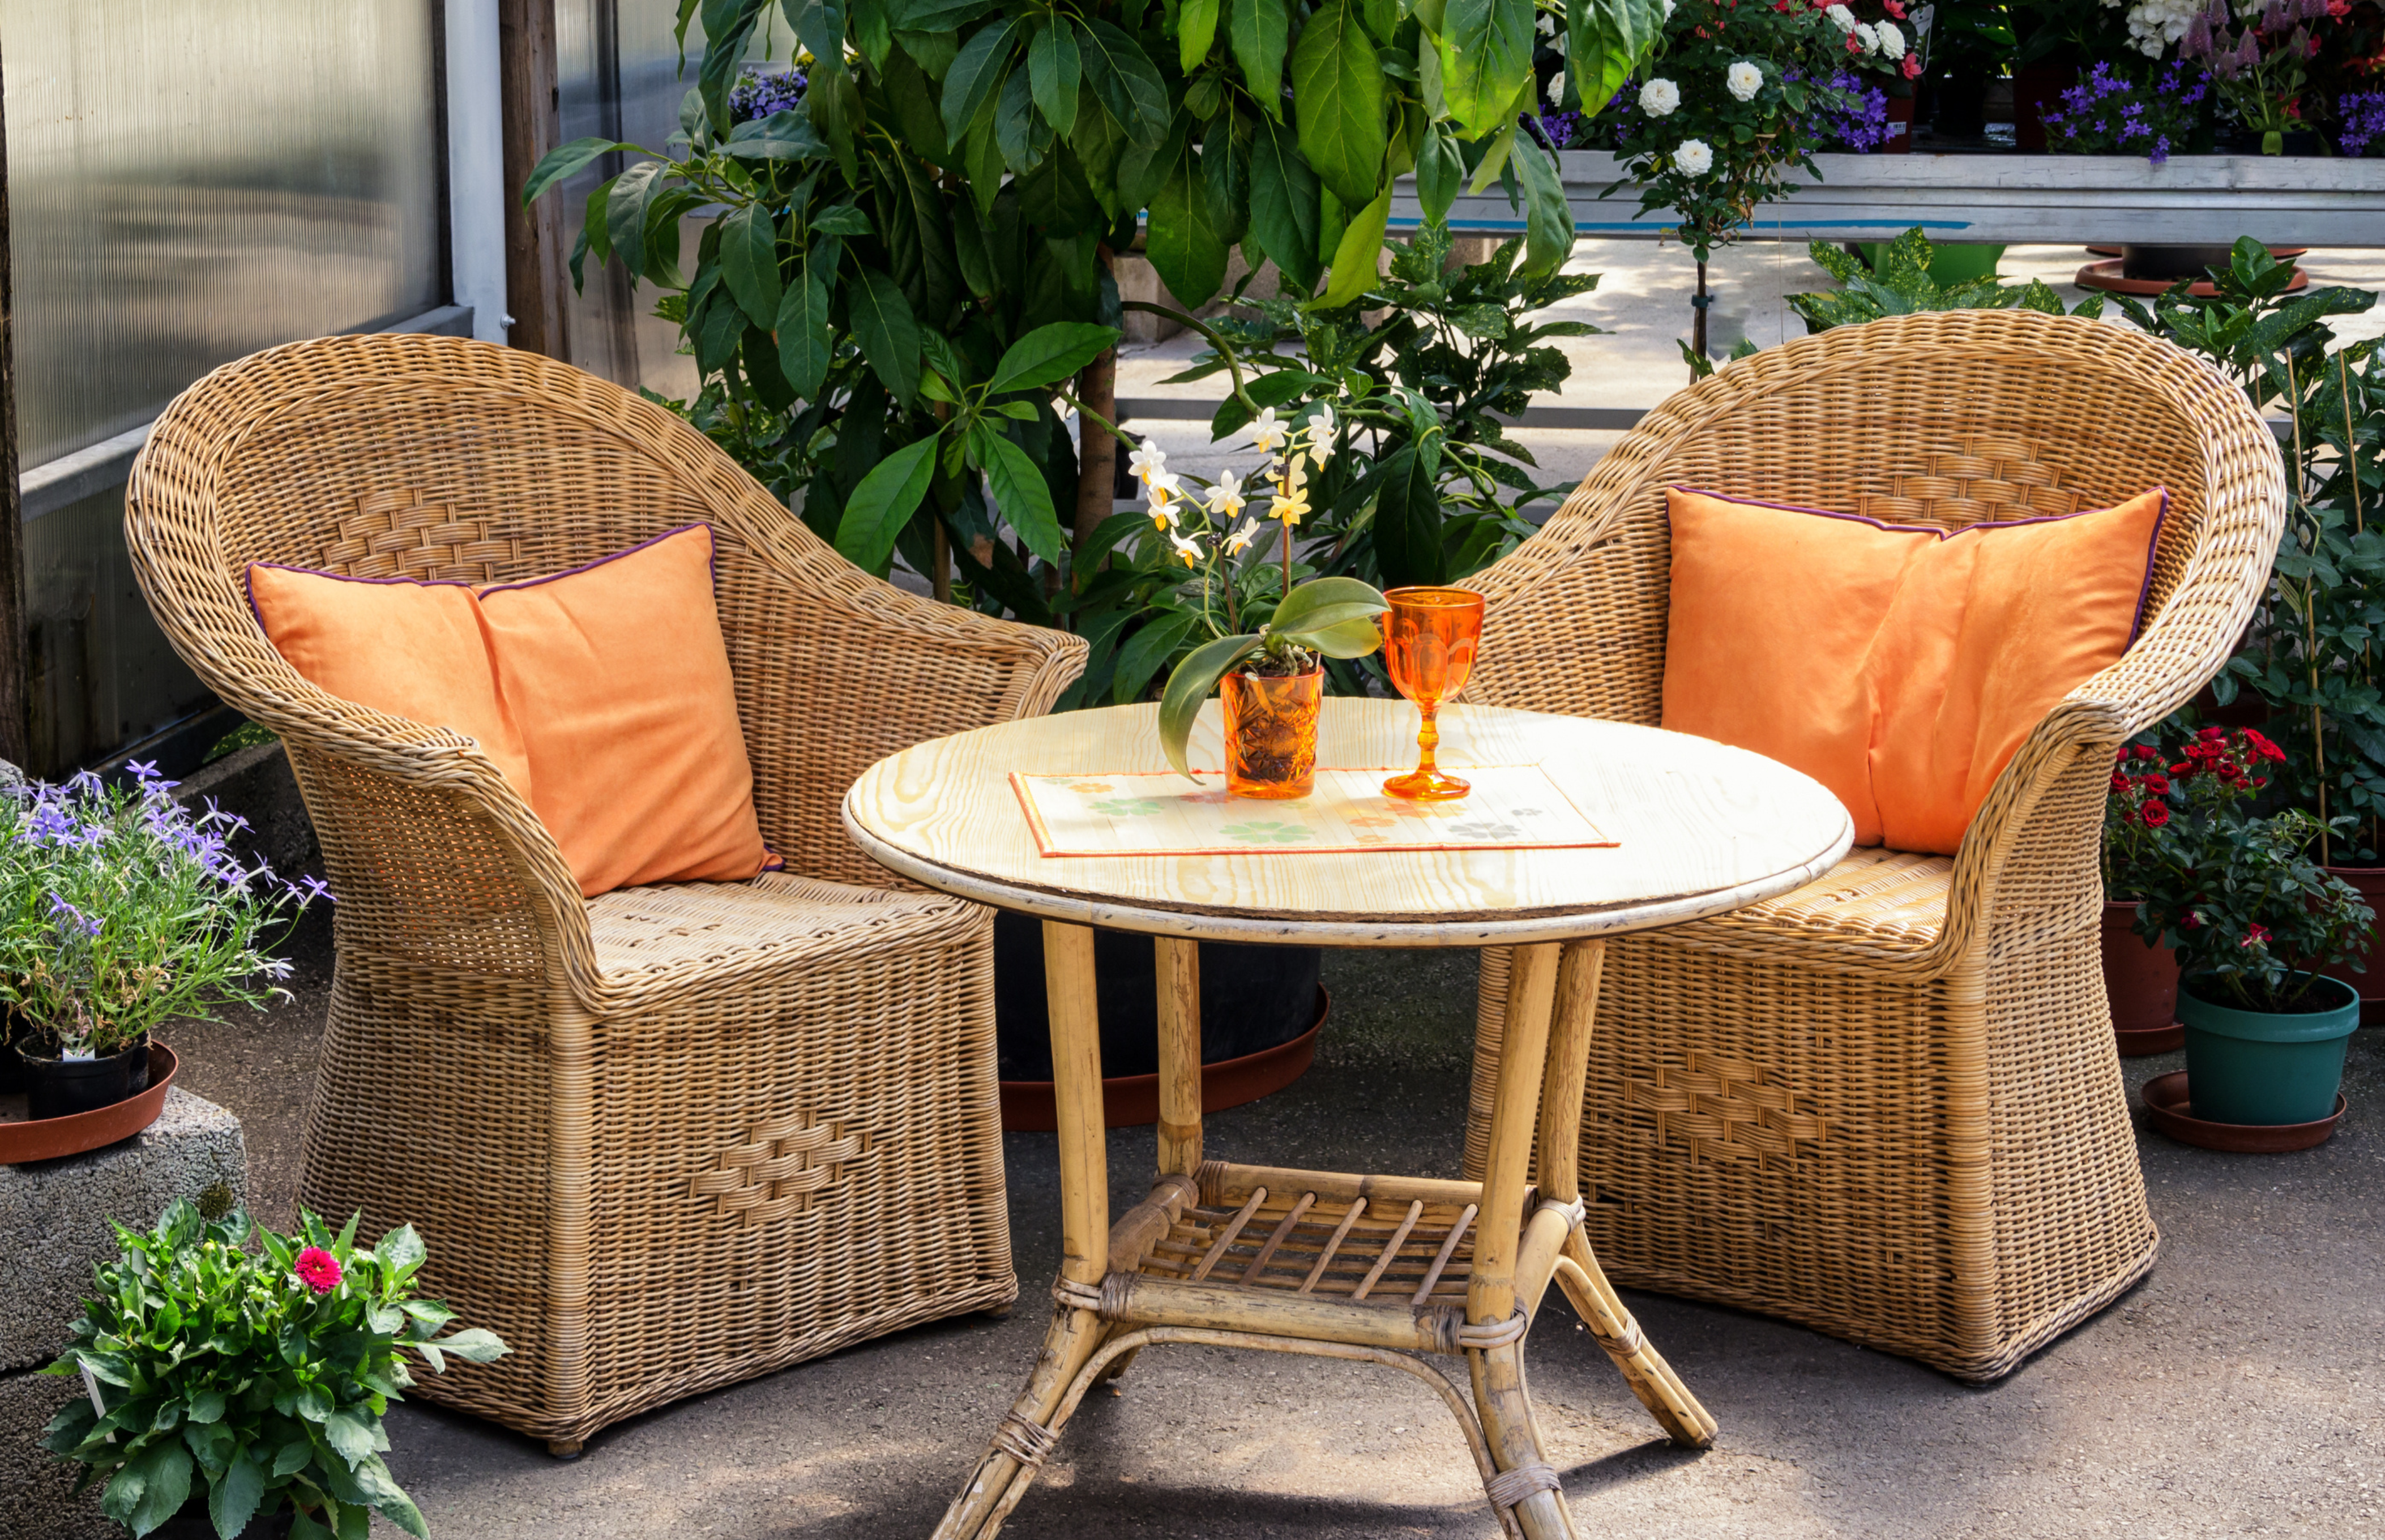 Two chairs and a table on this patio are surrounded by beautiful plants and flowers.